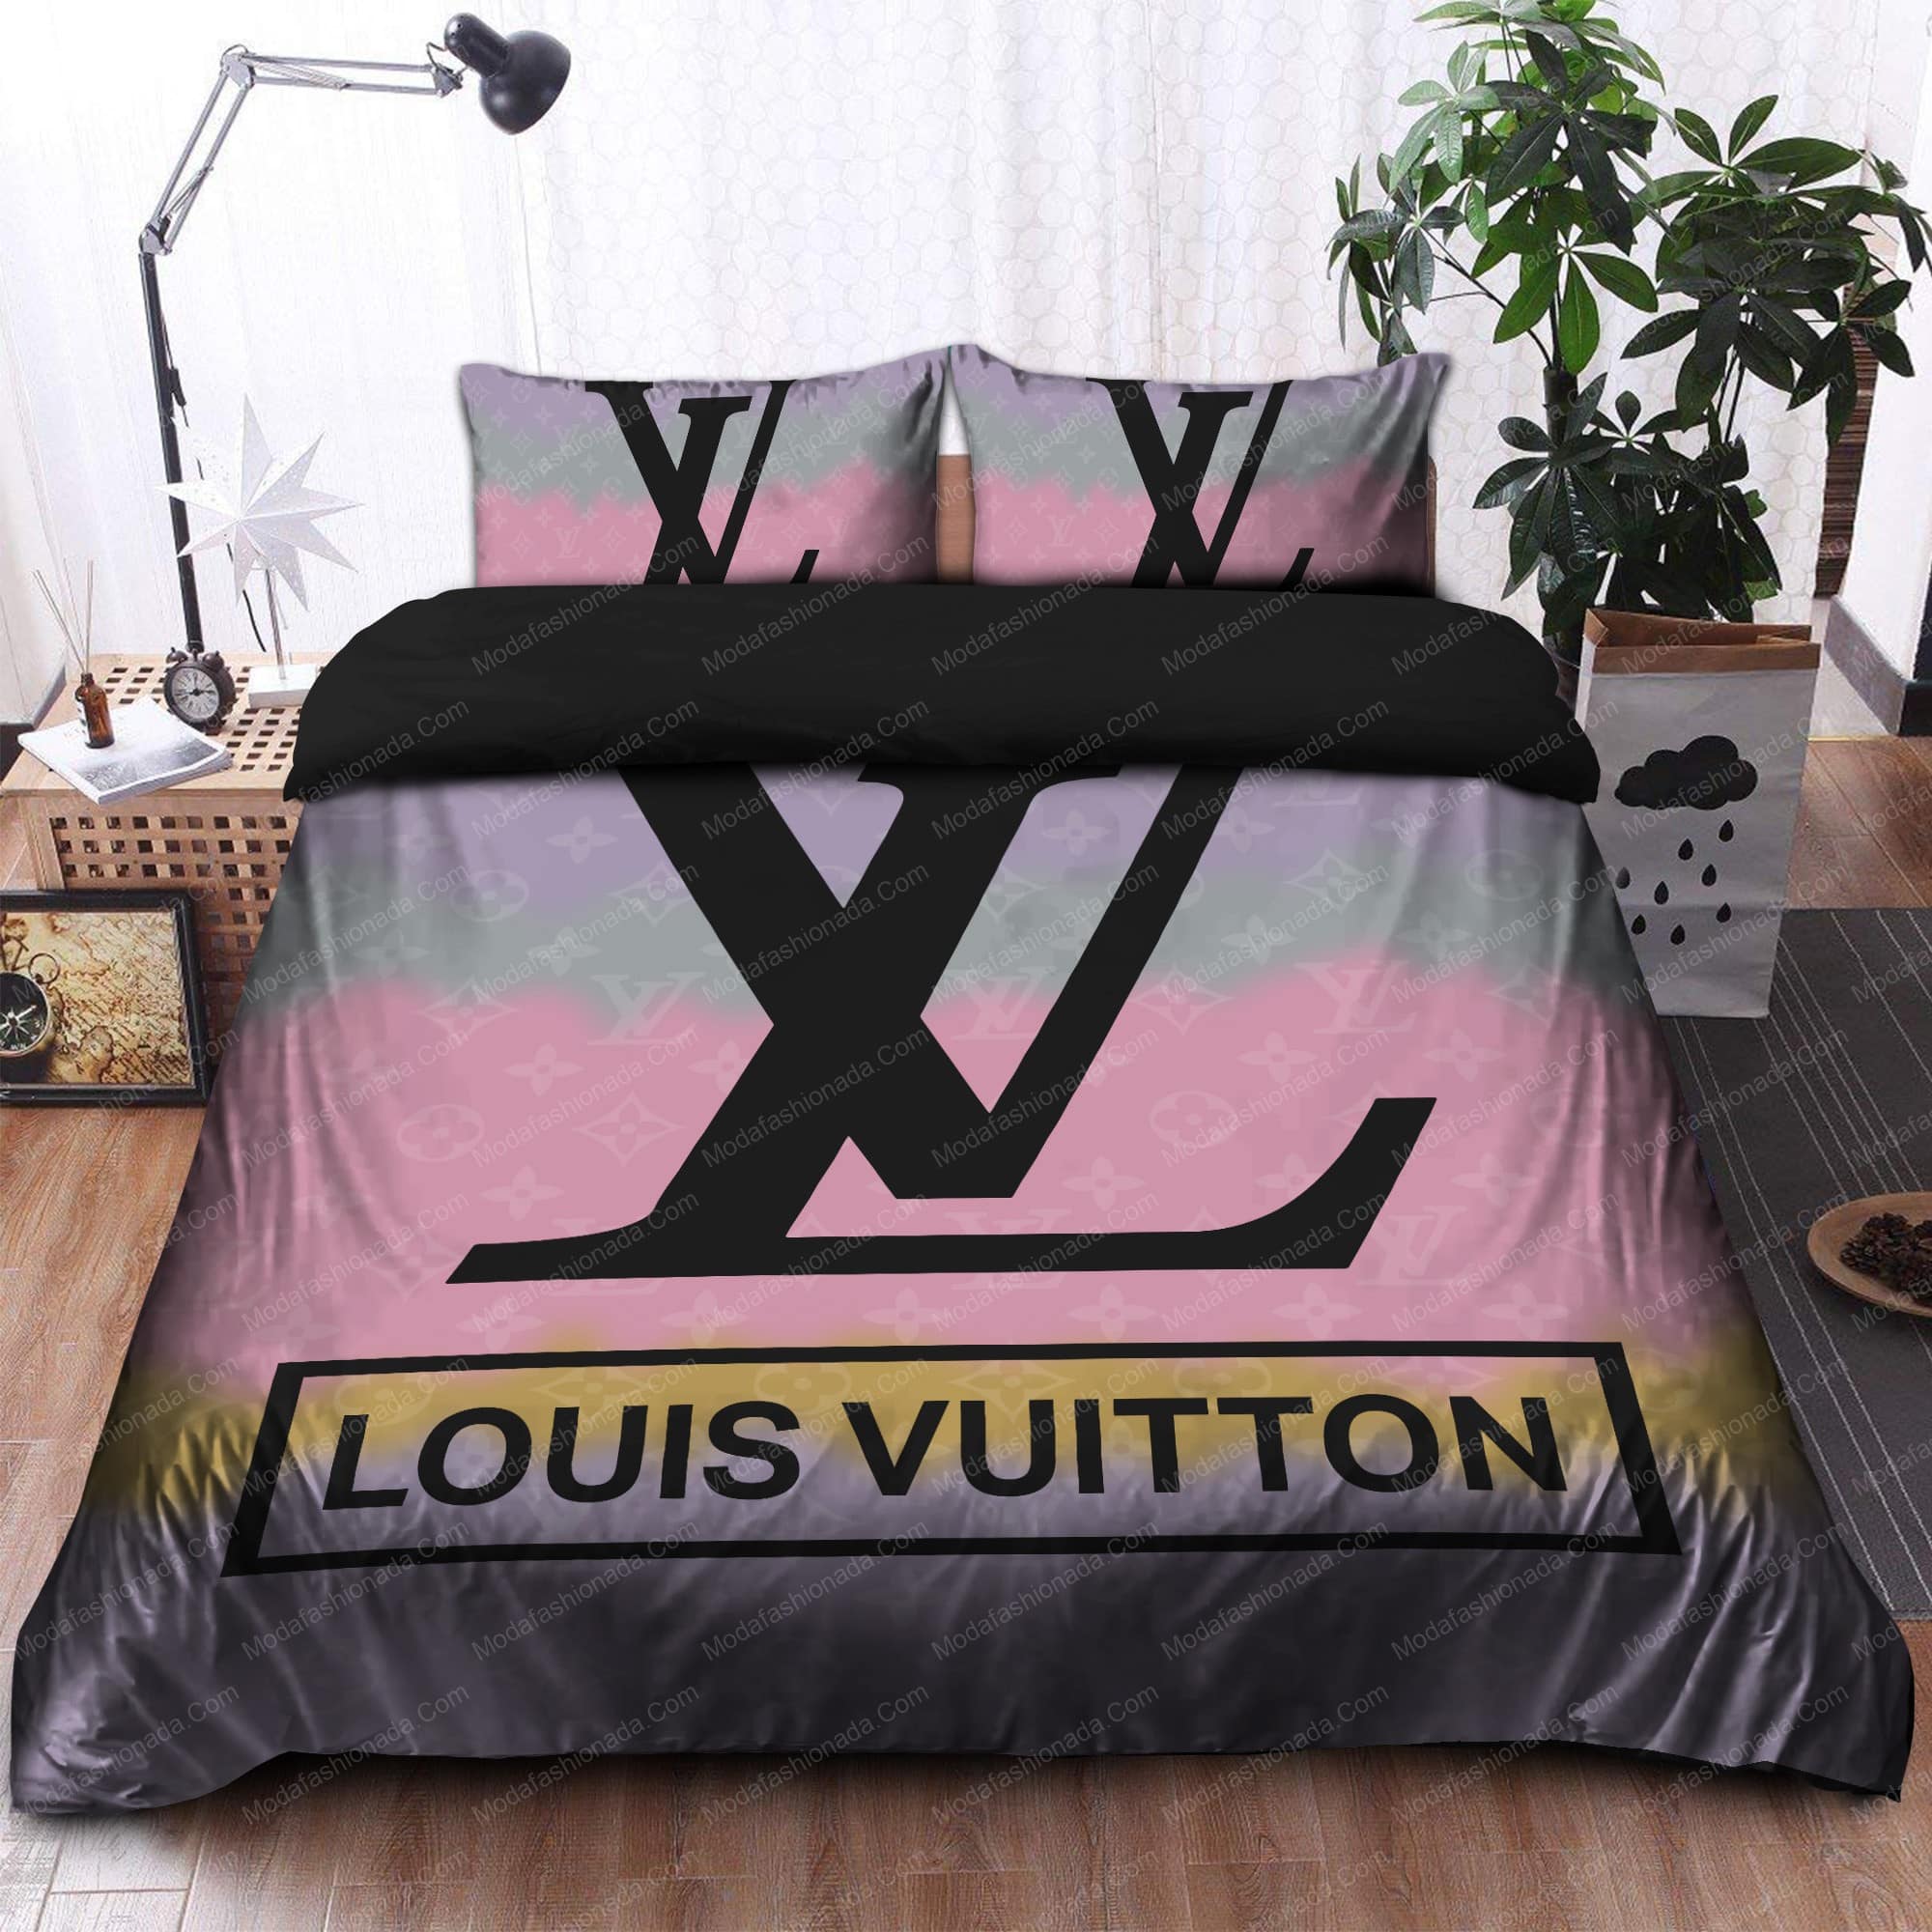 Louis Vuitton 3D Bedding Sets - Beddings and duvets in uganda